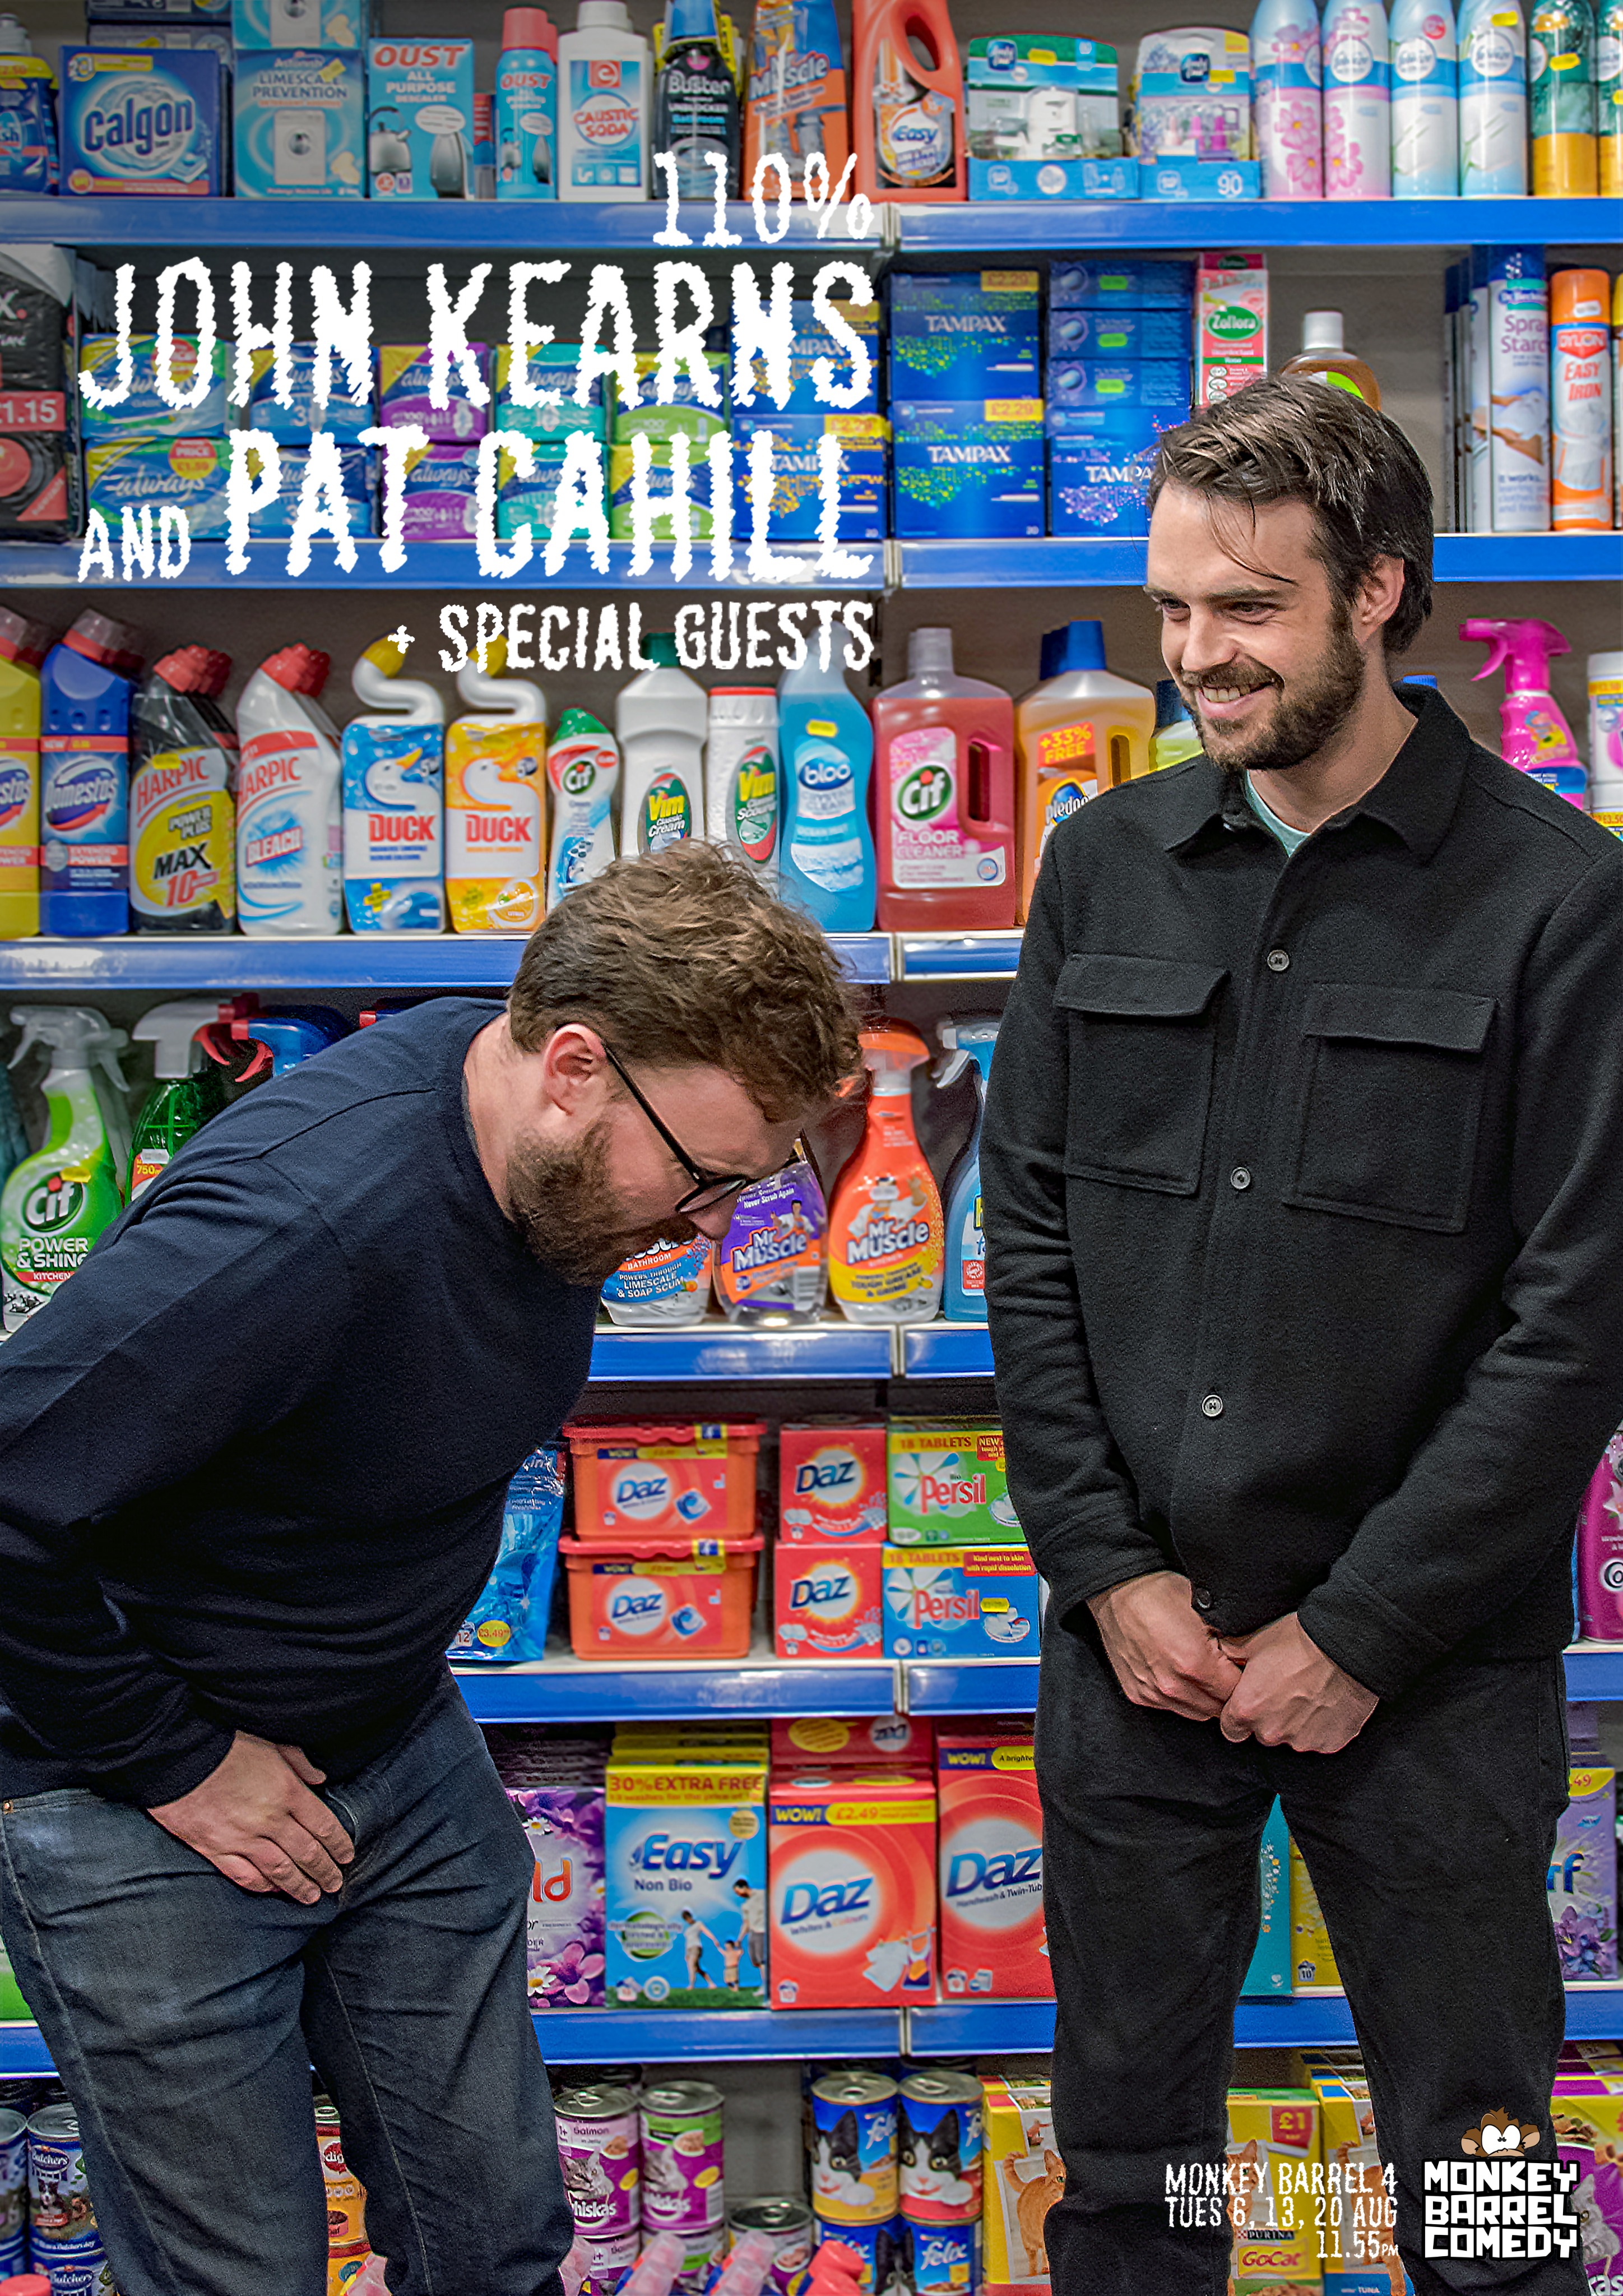 The poster for 110% John Kearns and Pat Cahill